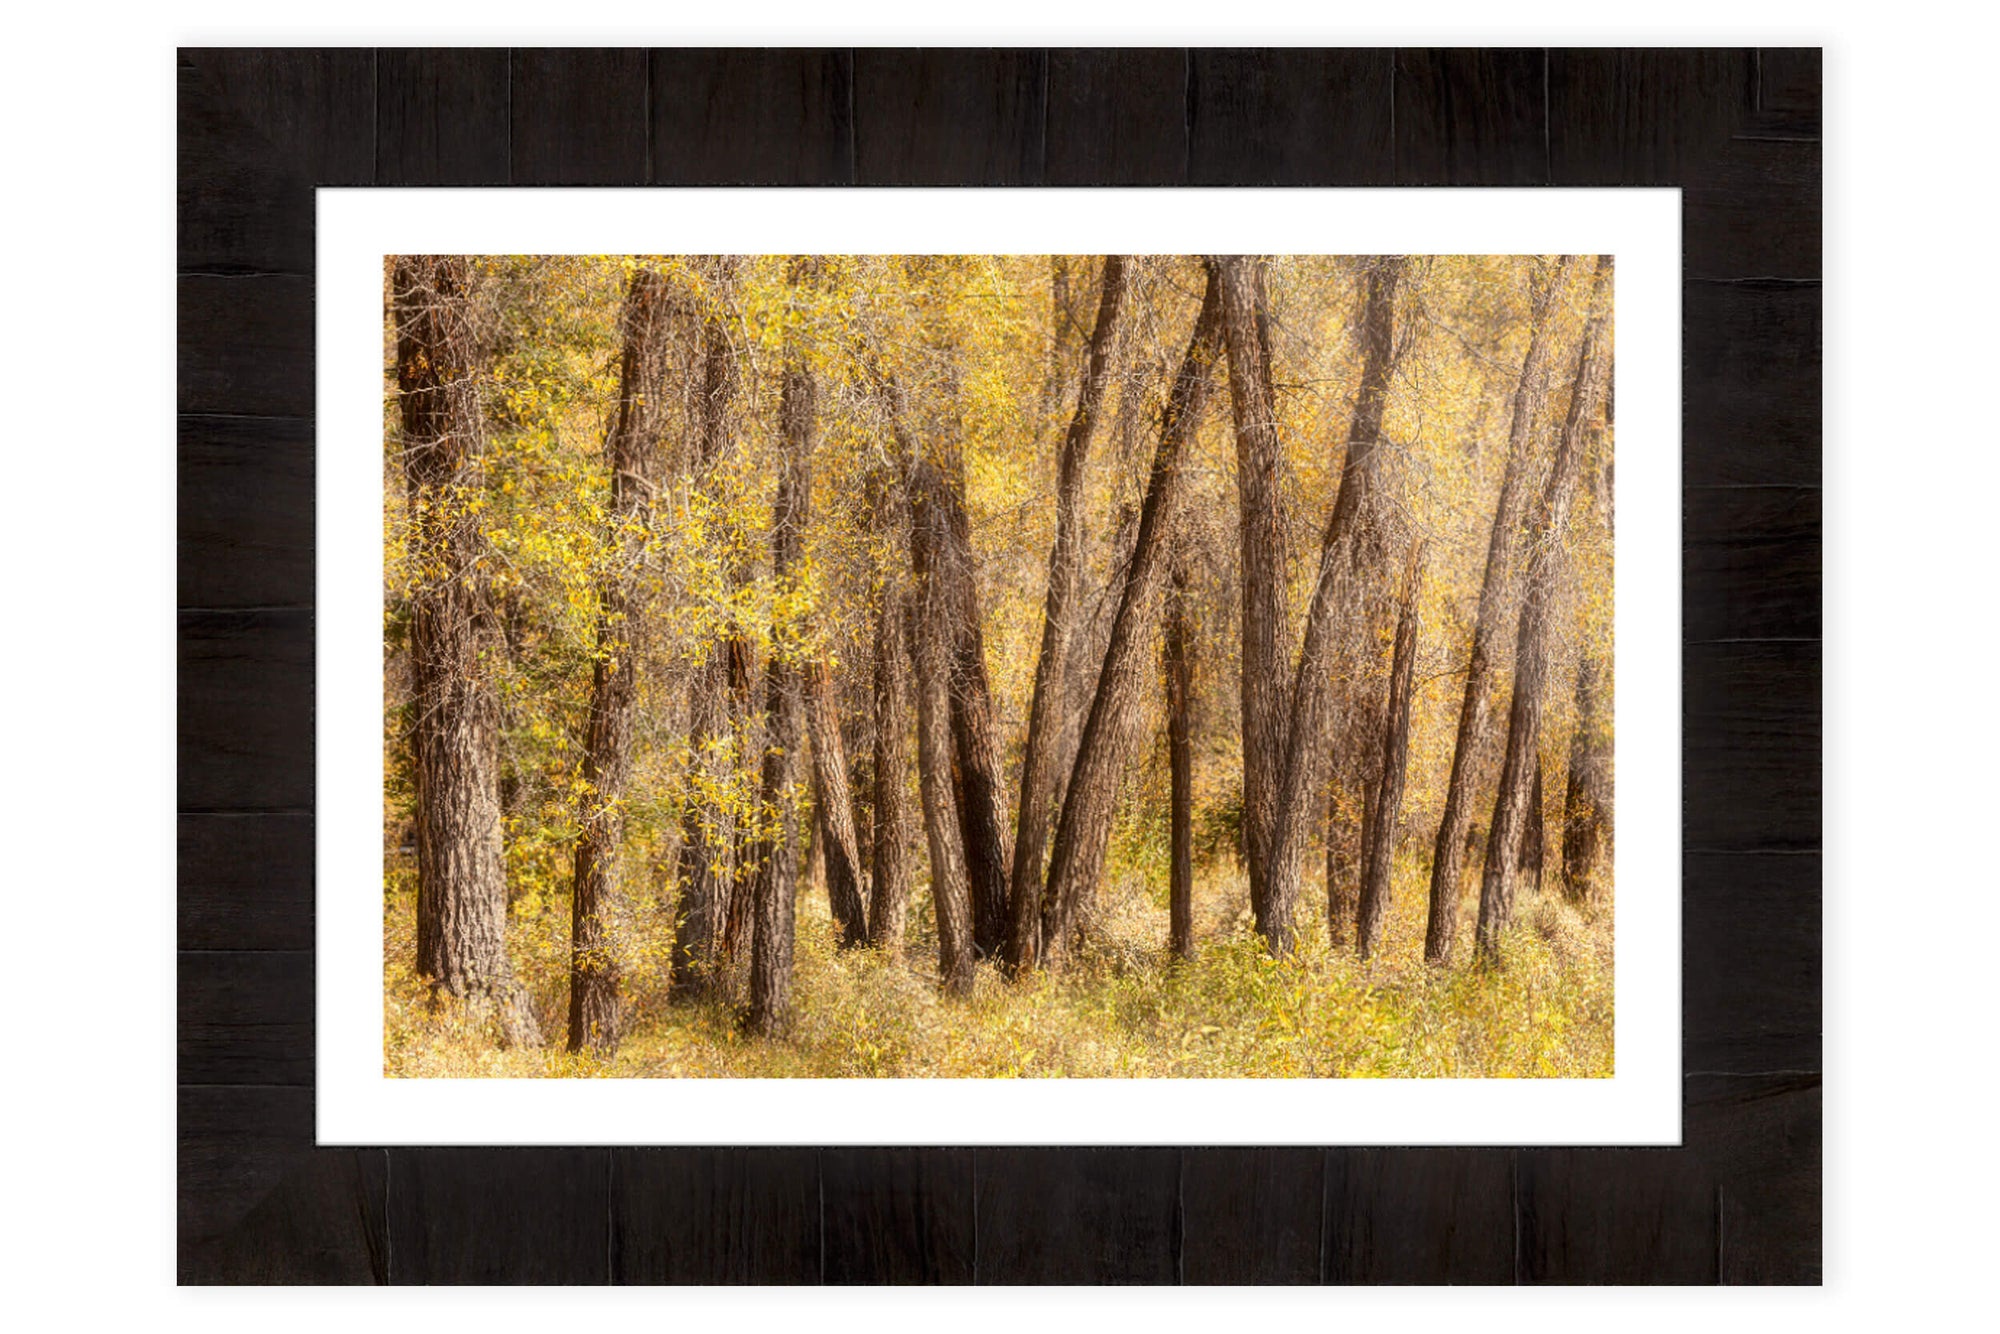 This piece of framed Jackson Hole art shows fall colors in Grand Teton National Park.